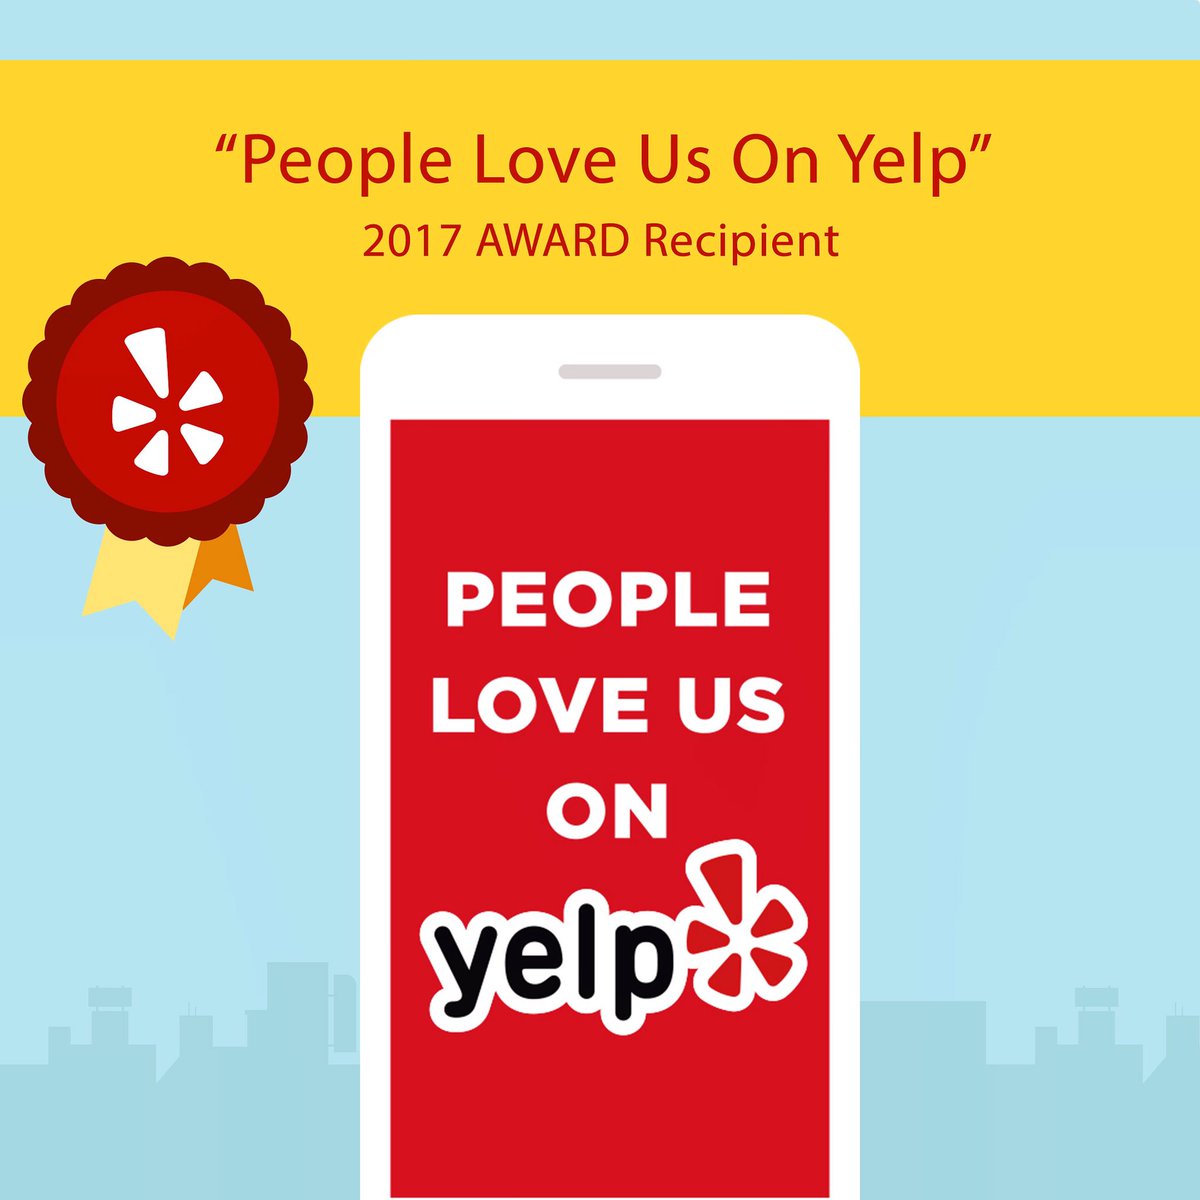 It's official - you guys love us!! Thanks so much for the positive reviews and support 🙌🏽❤️
#PeopleLoveUsOnYelp #Yelp